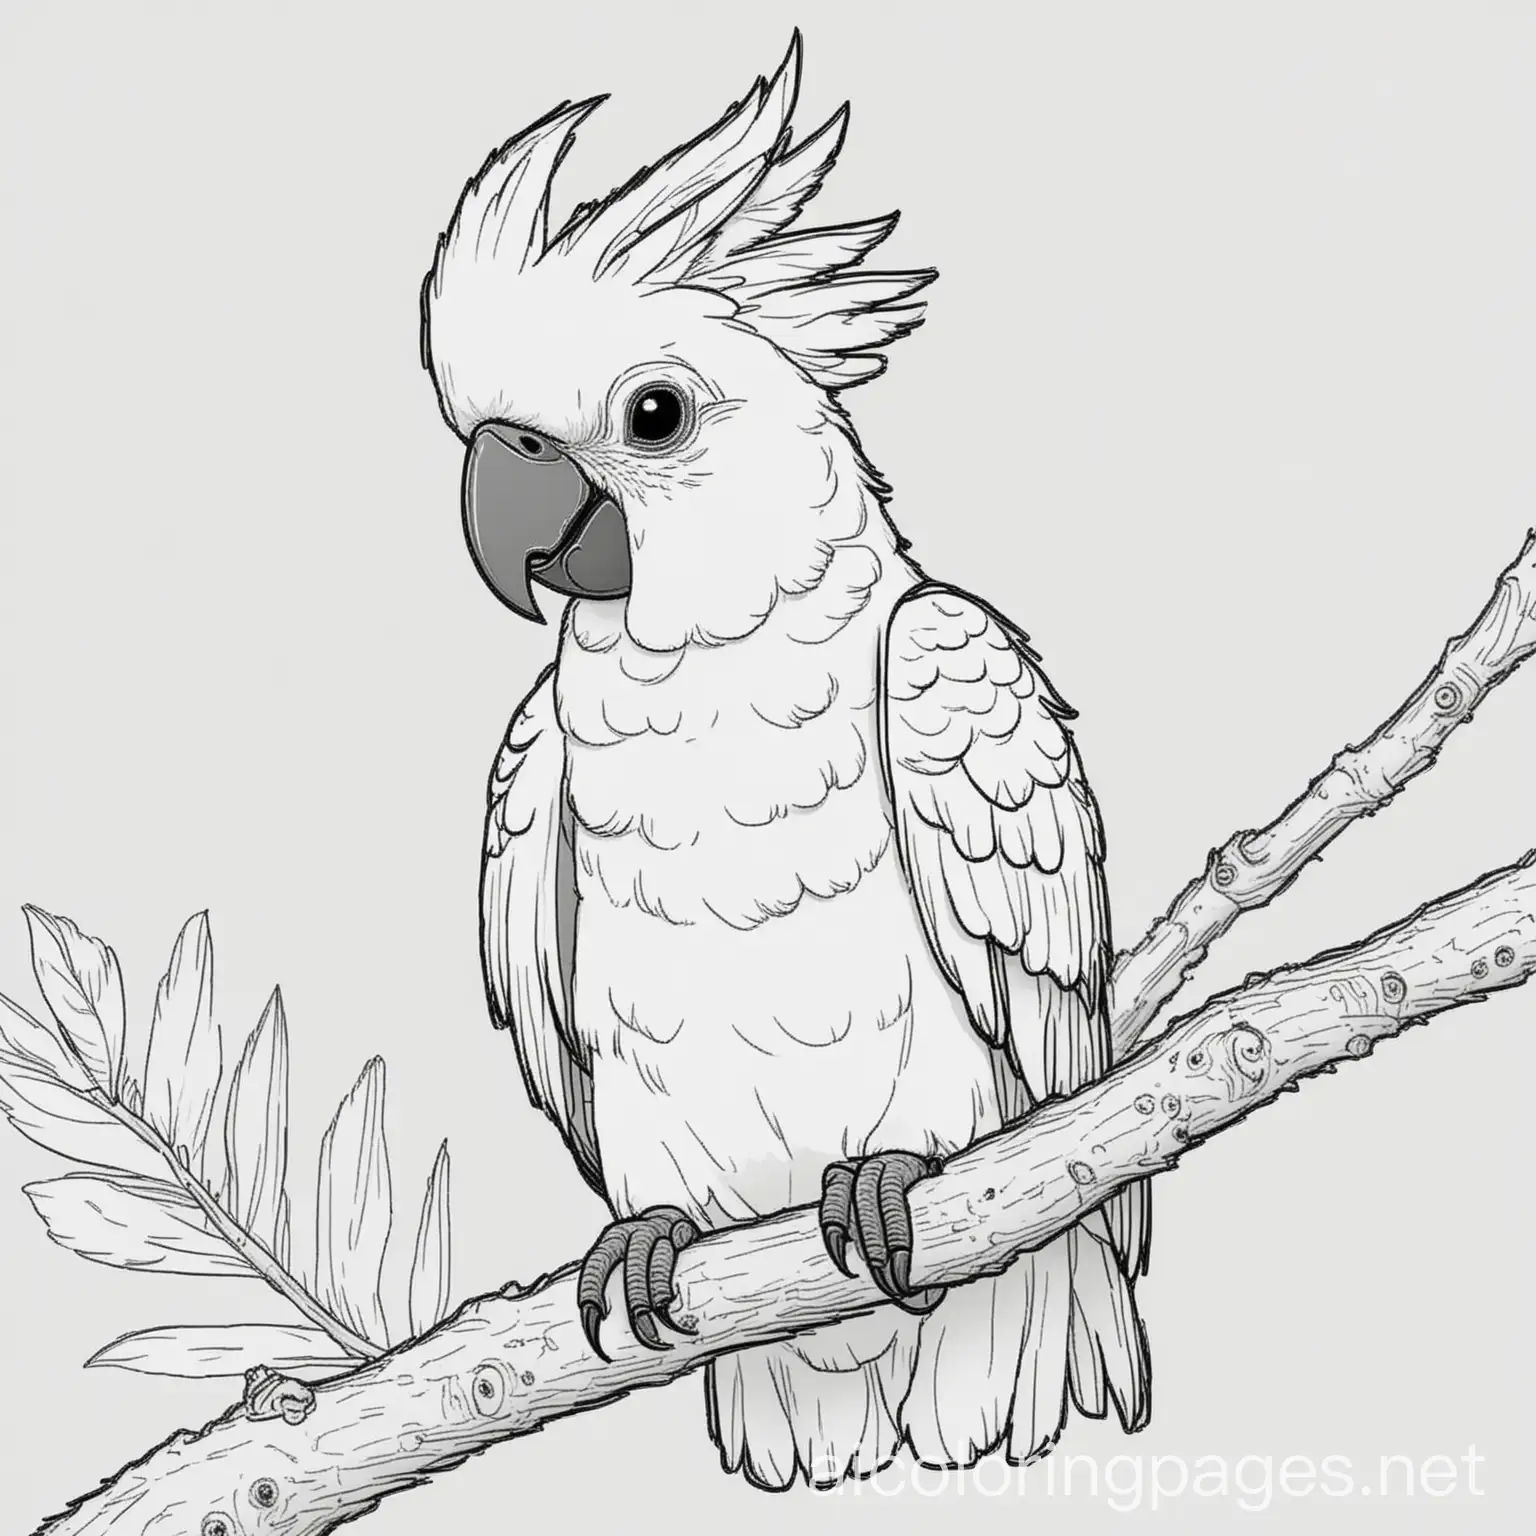 cockatoo in its habitad, toddler friendly, Coloring Page, black and white, line art, white background, Simplicity, Ample White Space. The background of the coloring page is plain white to make it easy for young children to color within the lines. The outlines of all the subjects are easy to distinguish, making it simple for kids to color without too much difficulty